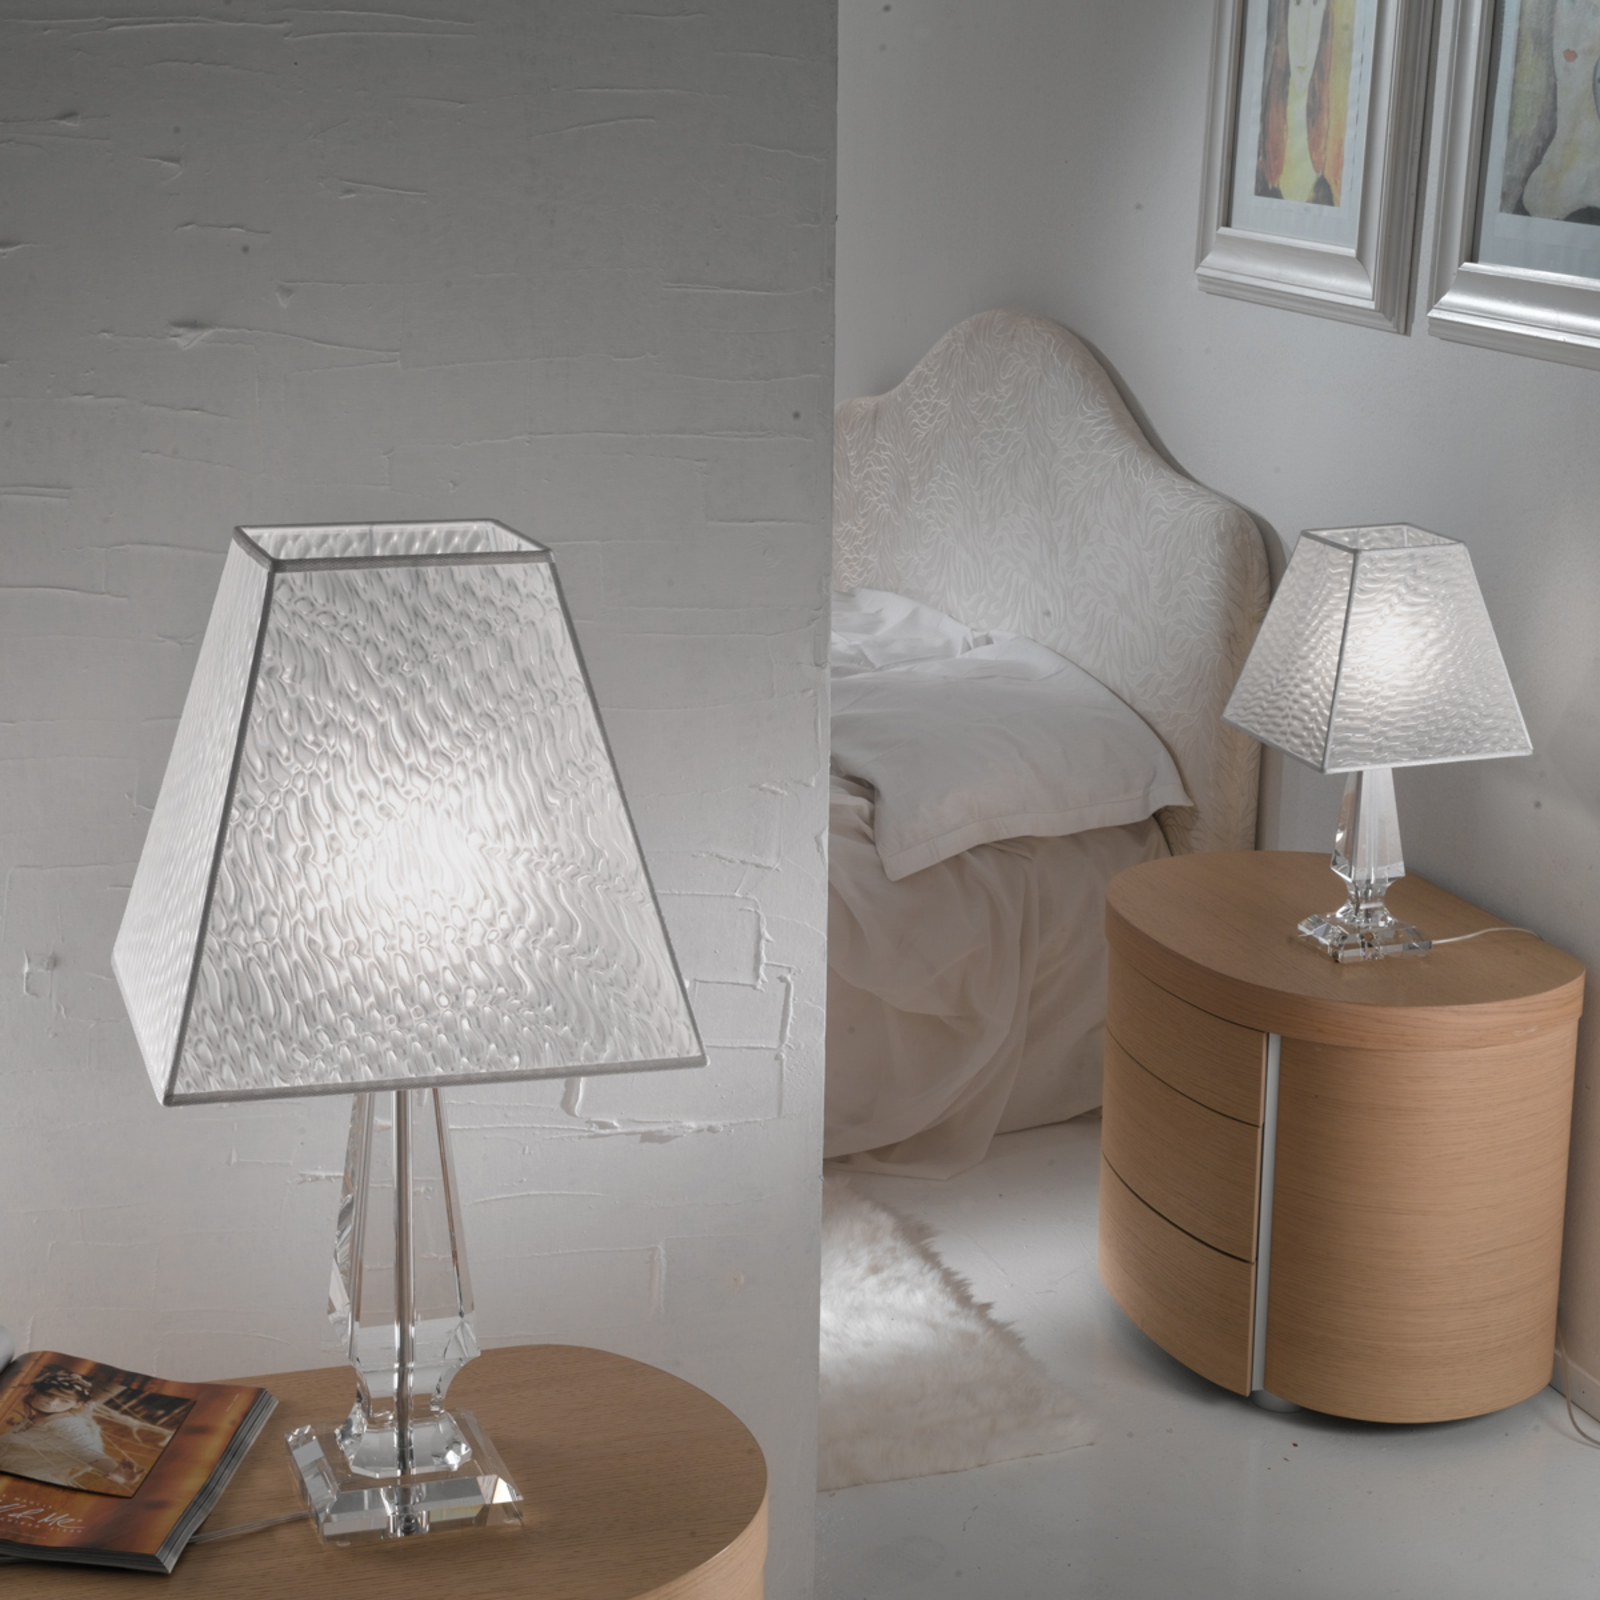 Light-looking Notte table lamp